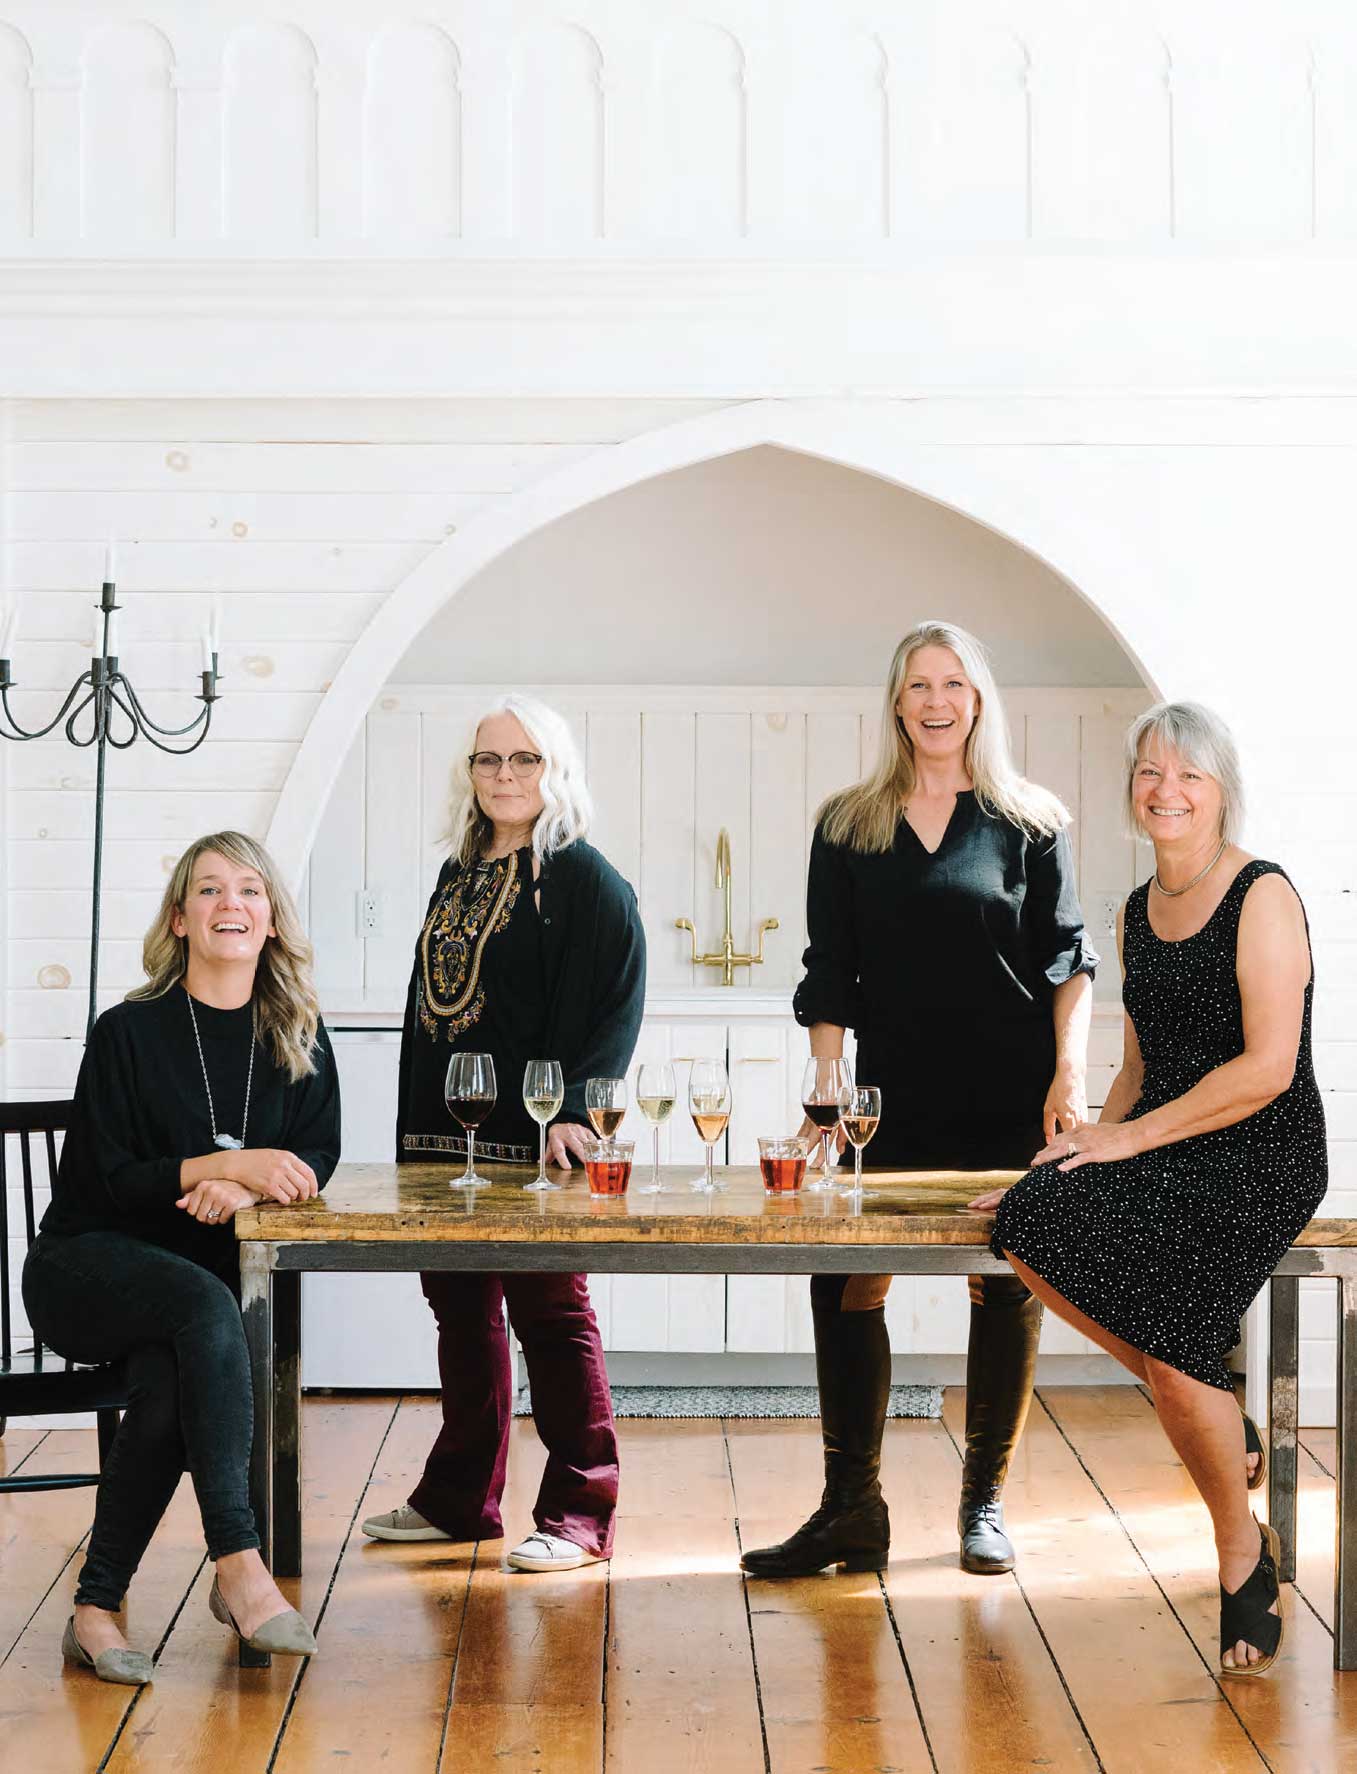 Astrid Young, Marlise Ponzo, Bev Carnahan and Sara Boyd sitting at a table drinking wine